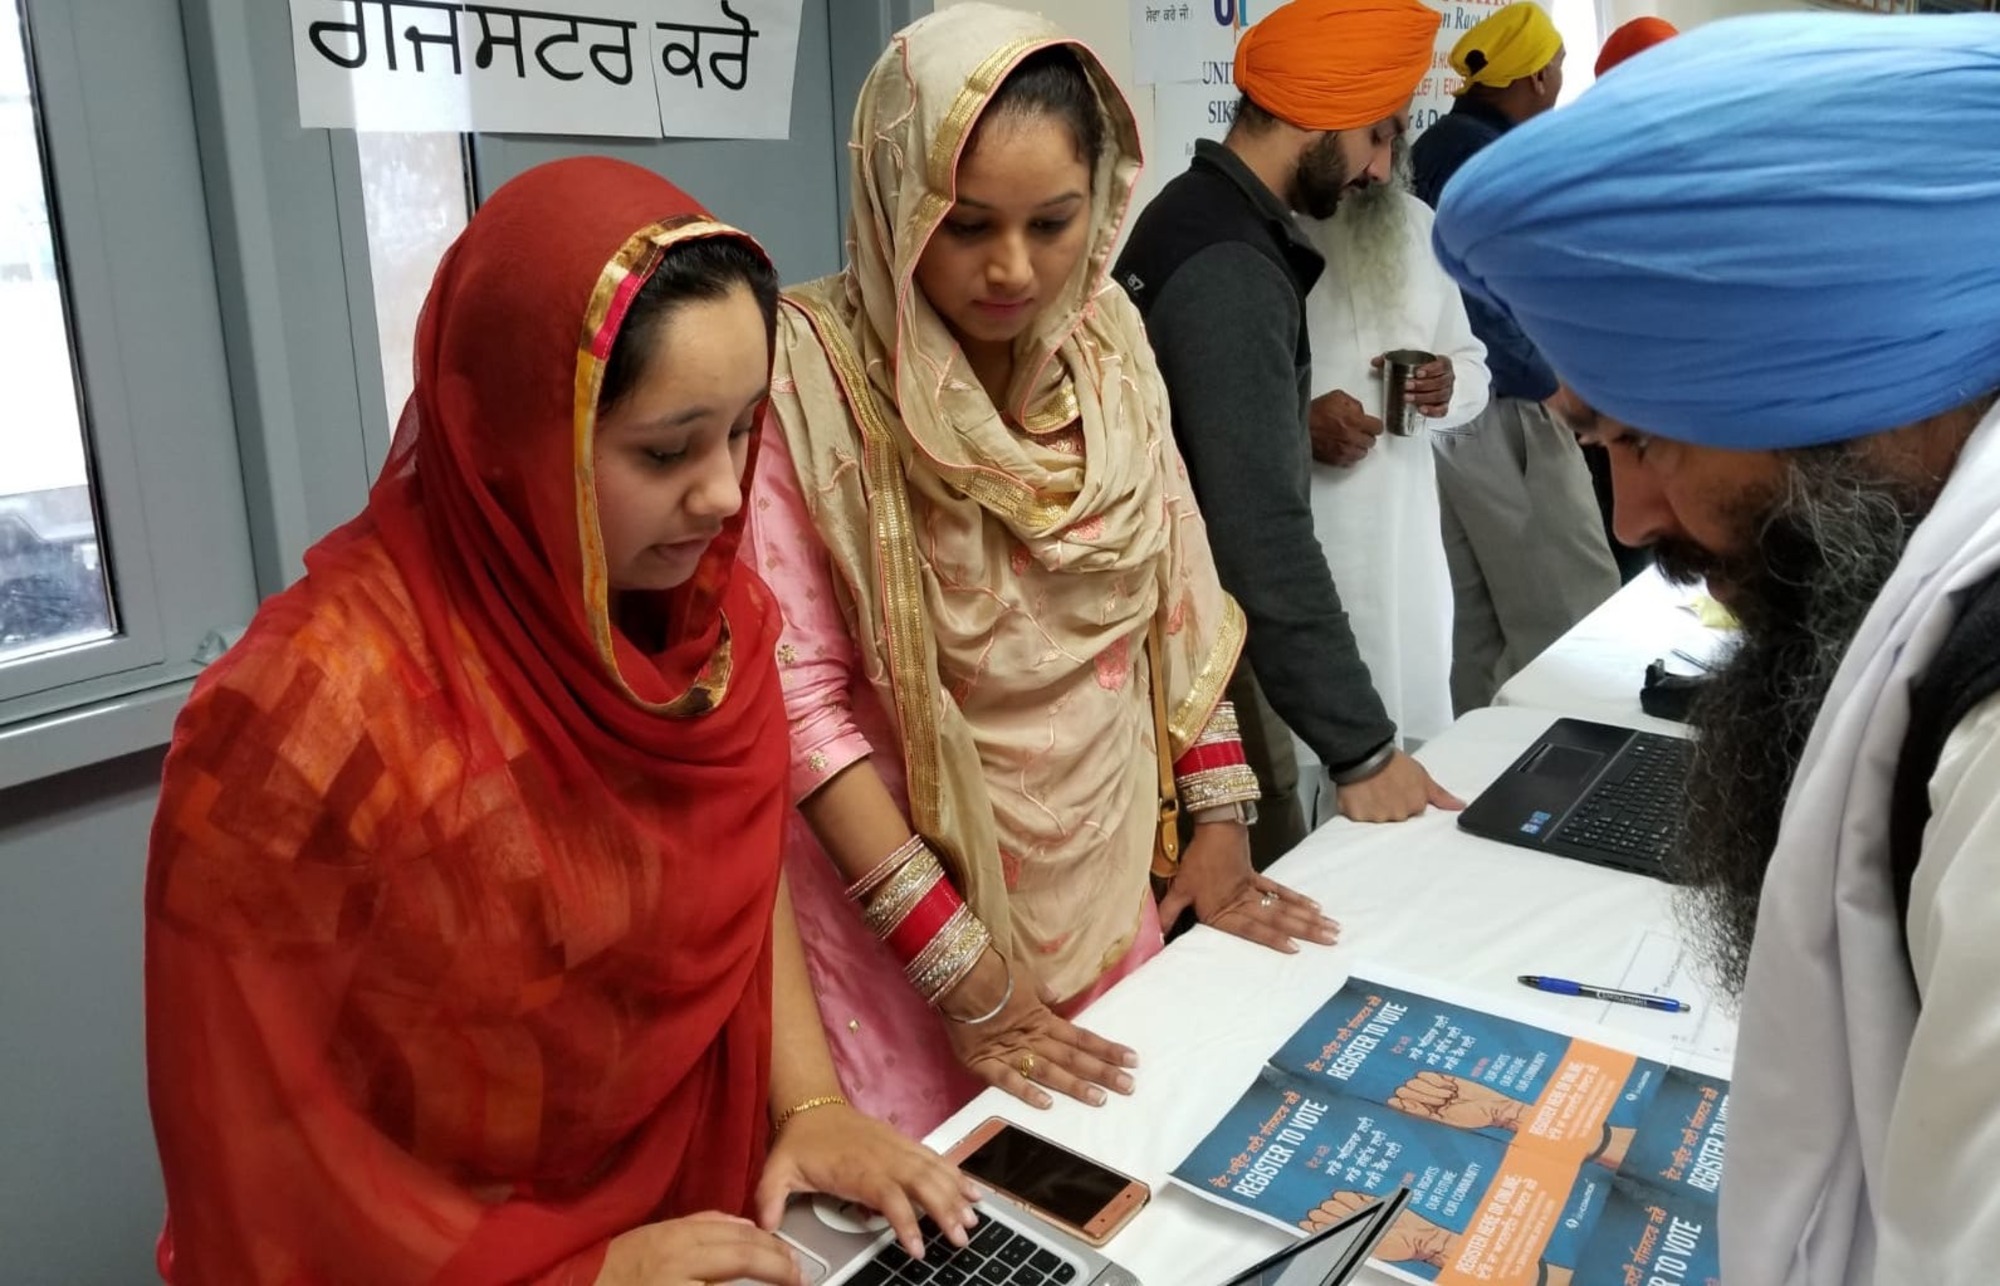 Sikh advocates are counting on young people to increase voting in their community